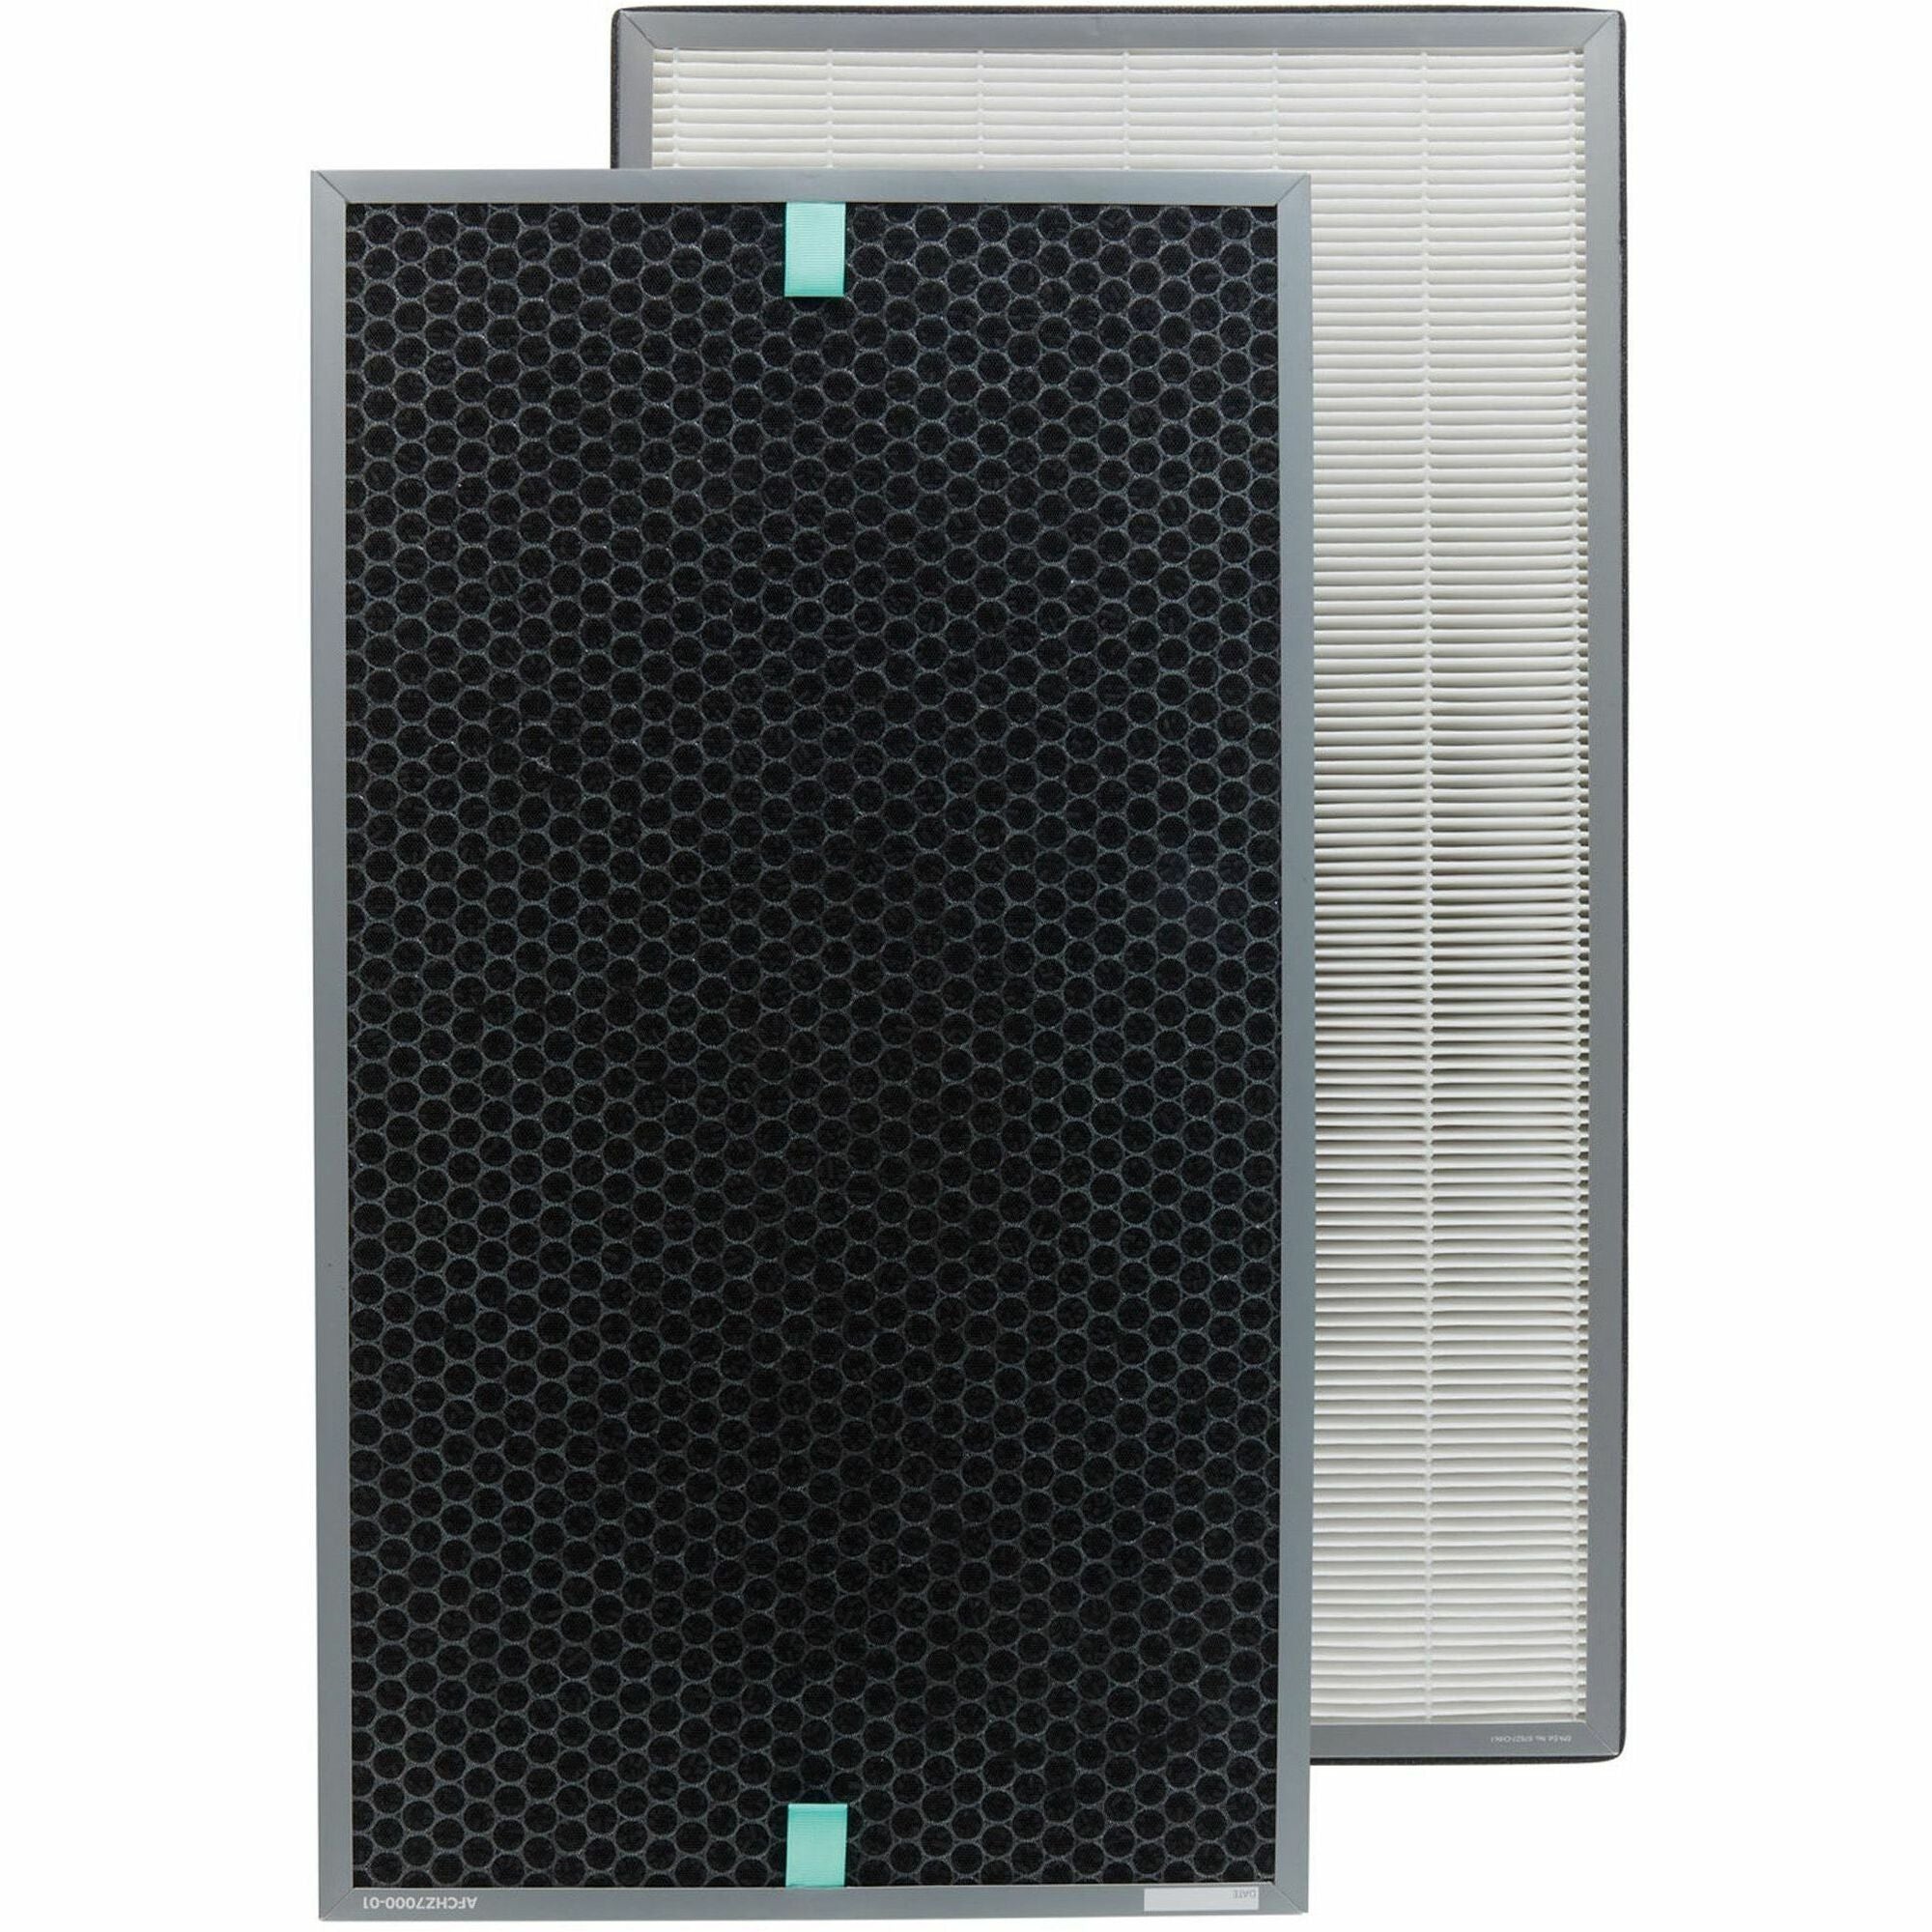 TruSens True HEPA Z-7000 Replacement Filter - HEPA/Activated Carbon - For Air Purifier - Remove Virus, Remove Bacteria, Remove Airborne Particles, Remove Volatile Organic Compound, Remove Odor, Remove Dust - 100% Particle Removal Efficiency Particles